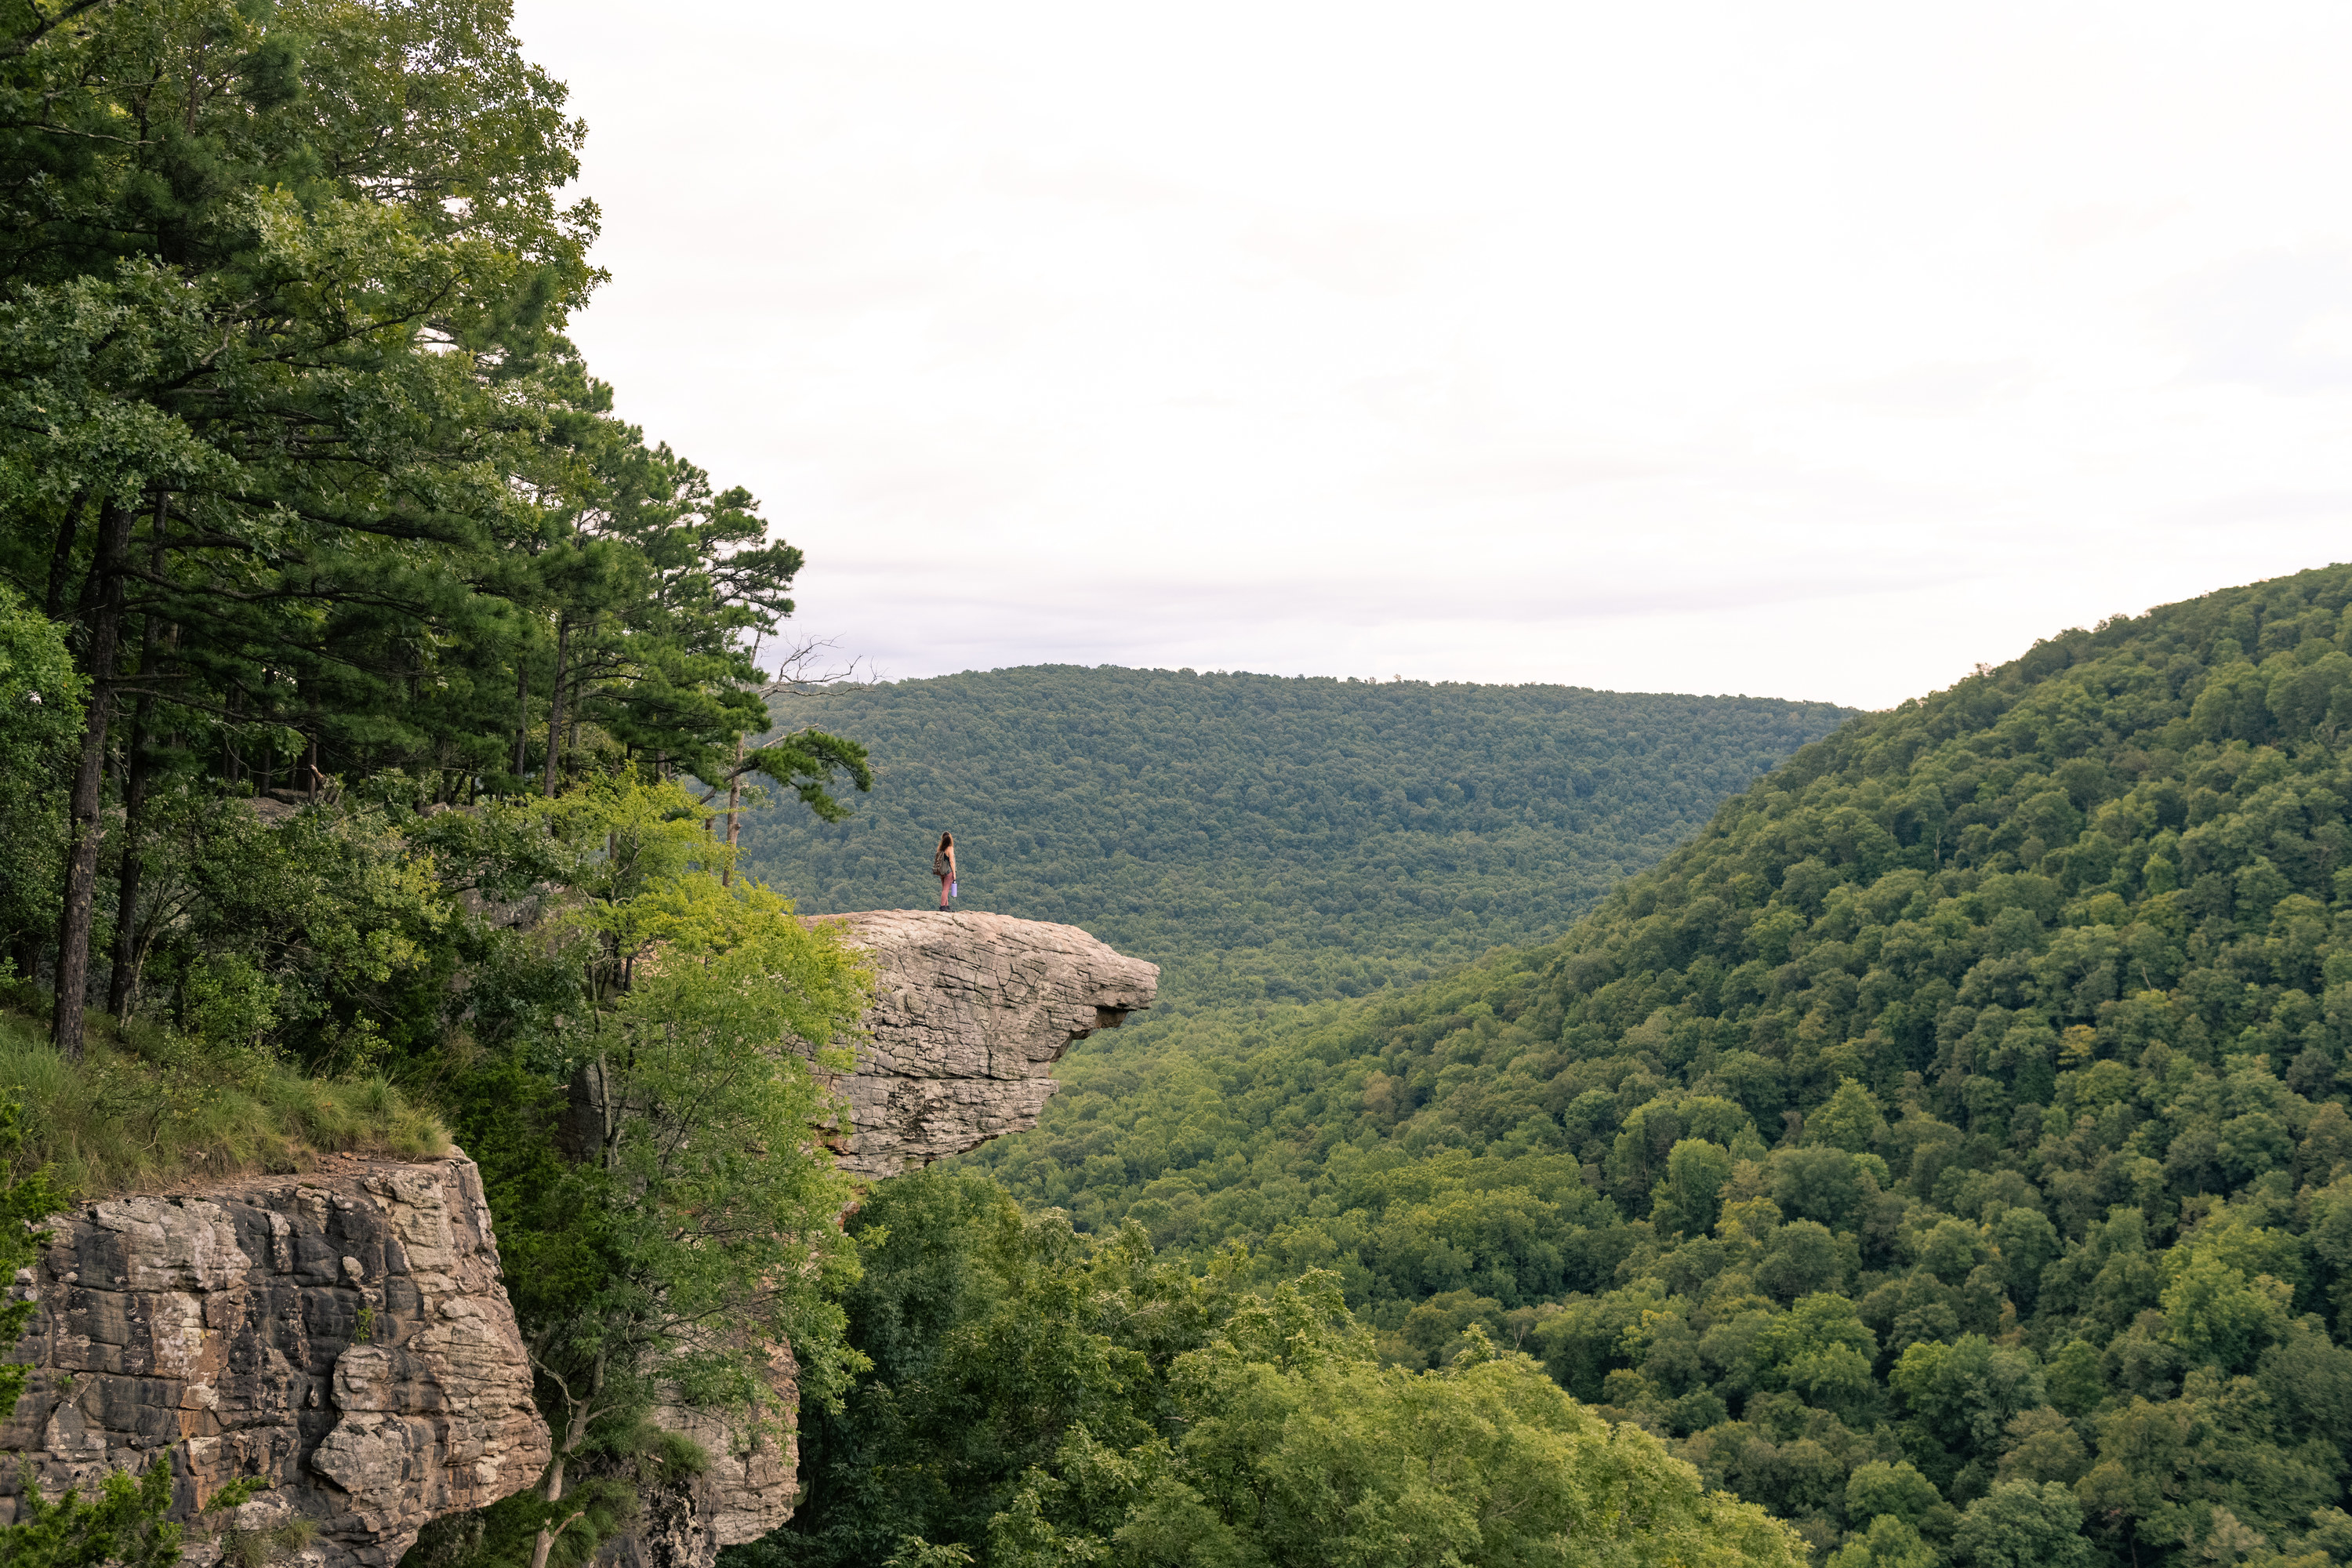 Person stands on a rock outcropping among green forest